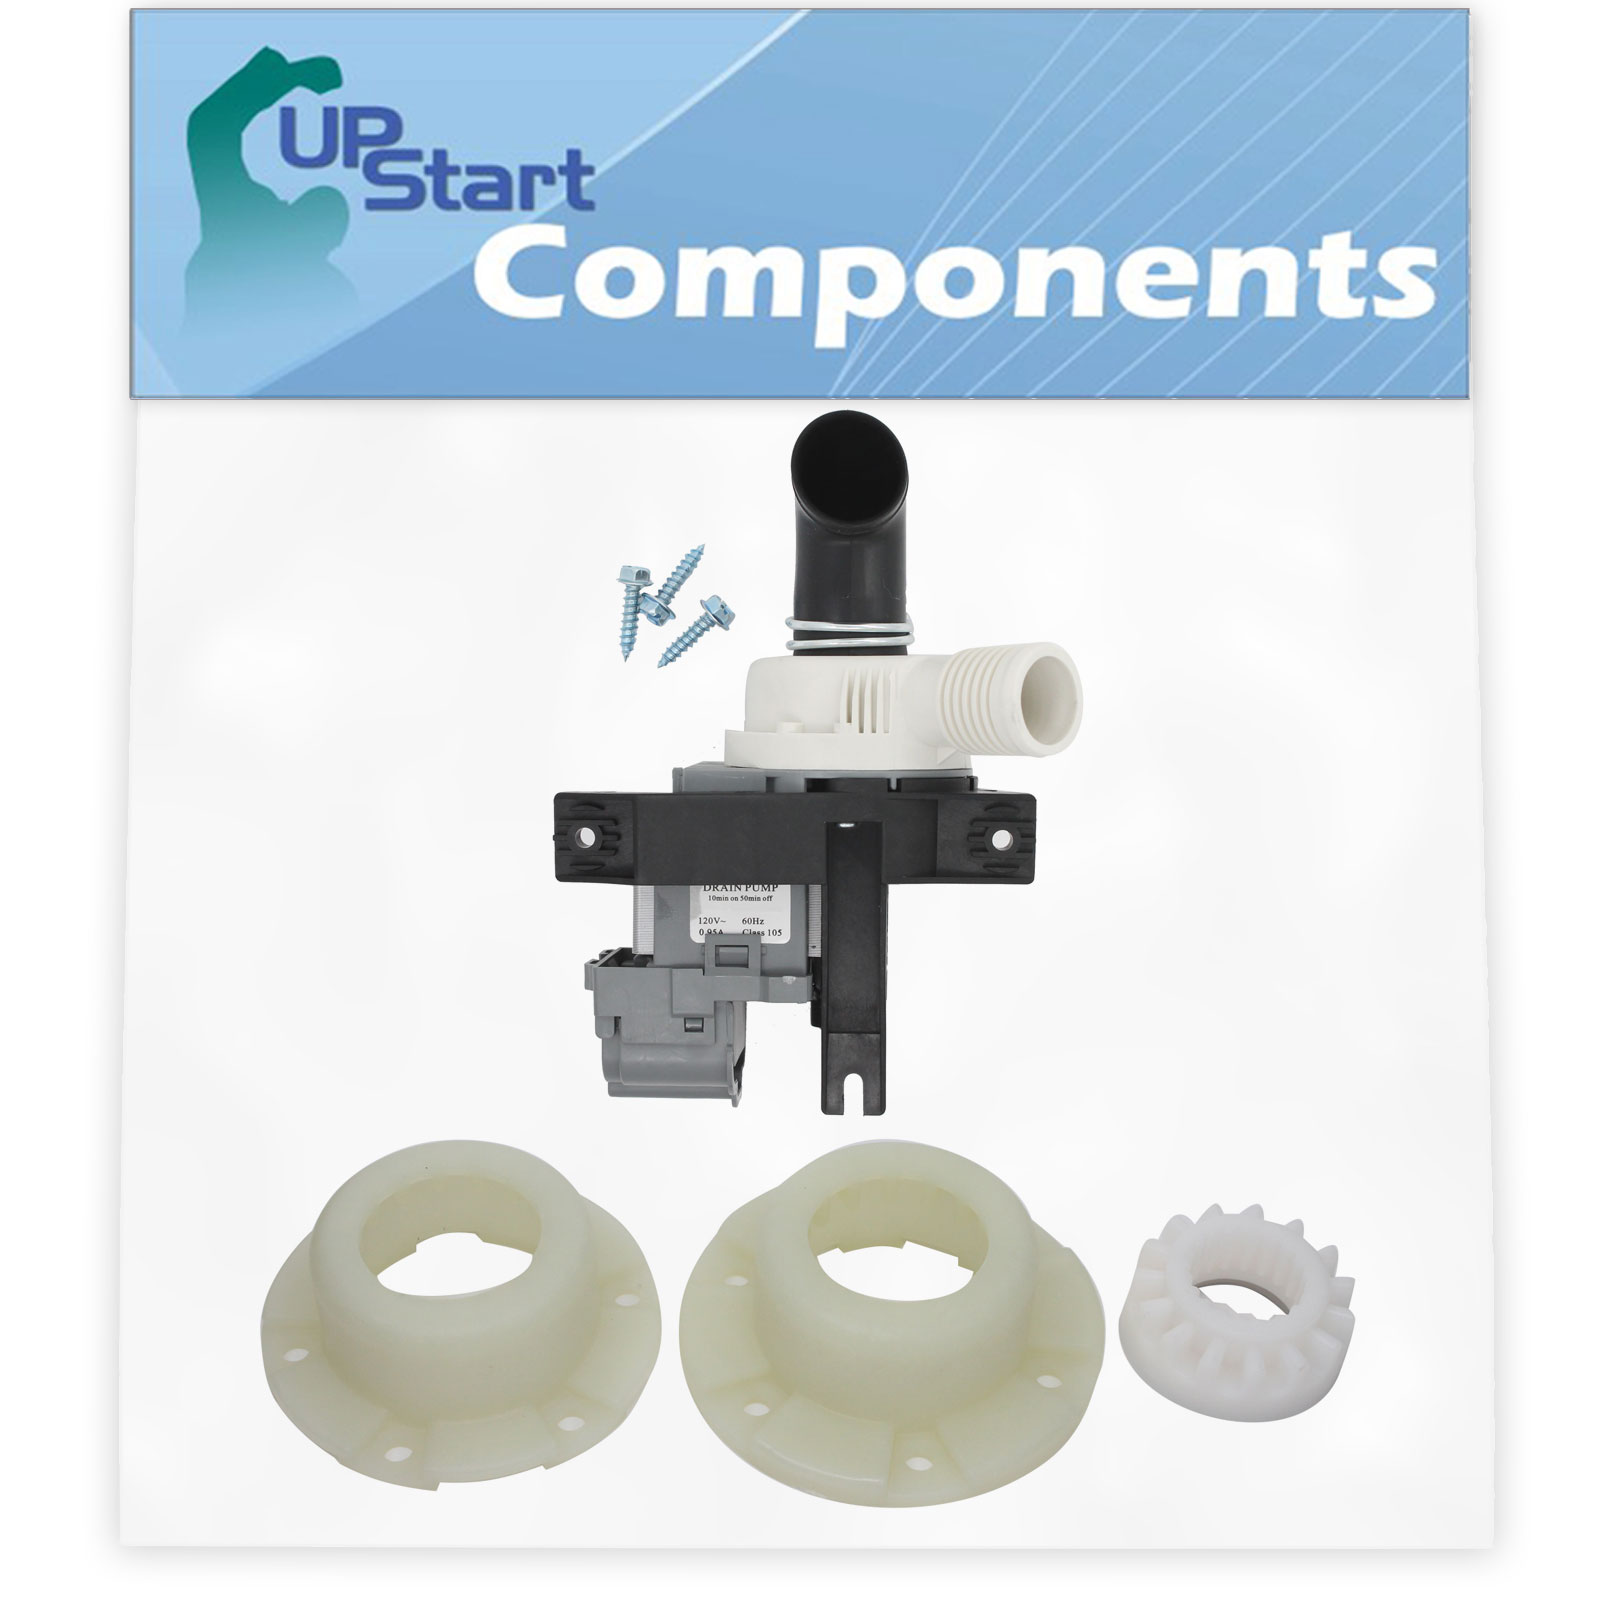 W10536347 Washer Drain Pump & 280145 Hub Kit Replacement for Maytag MTW6600TB0 Washing Machine - Compatible with W10217134 Water Pump & W10820039 Basket Hub Kit - UpStart Components Brand - image 1 of 4